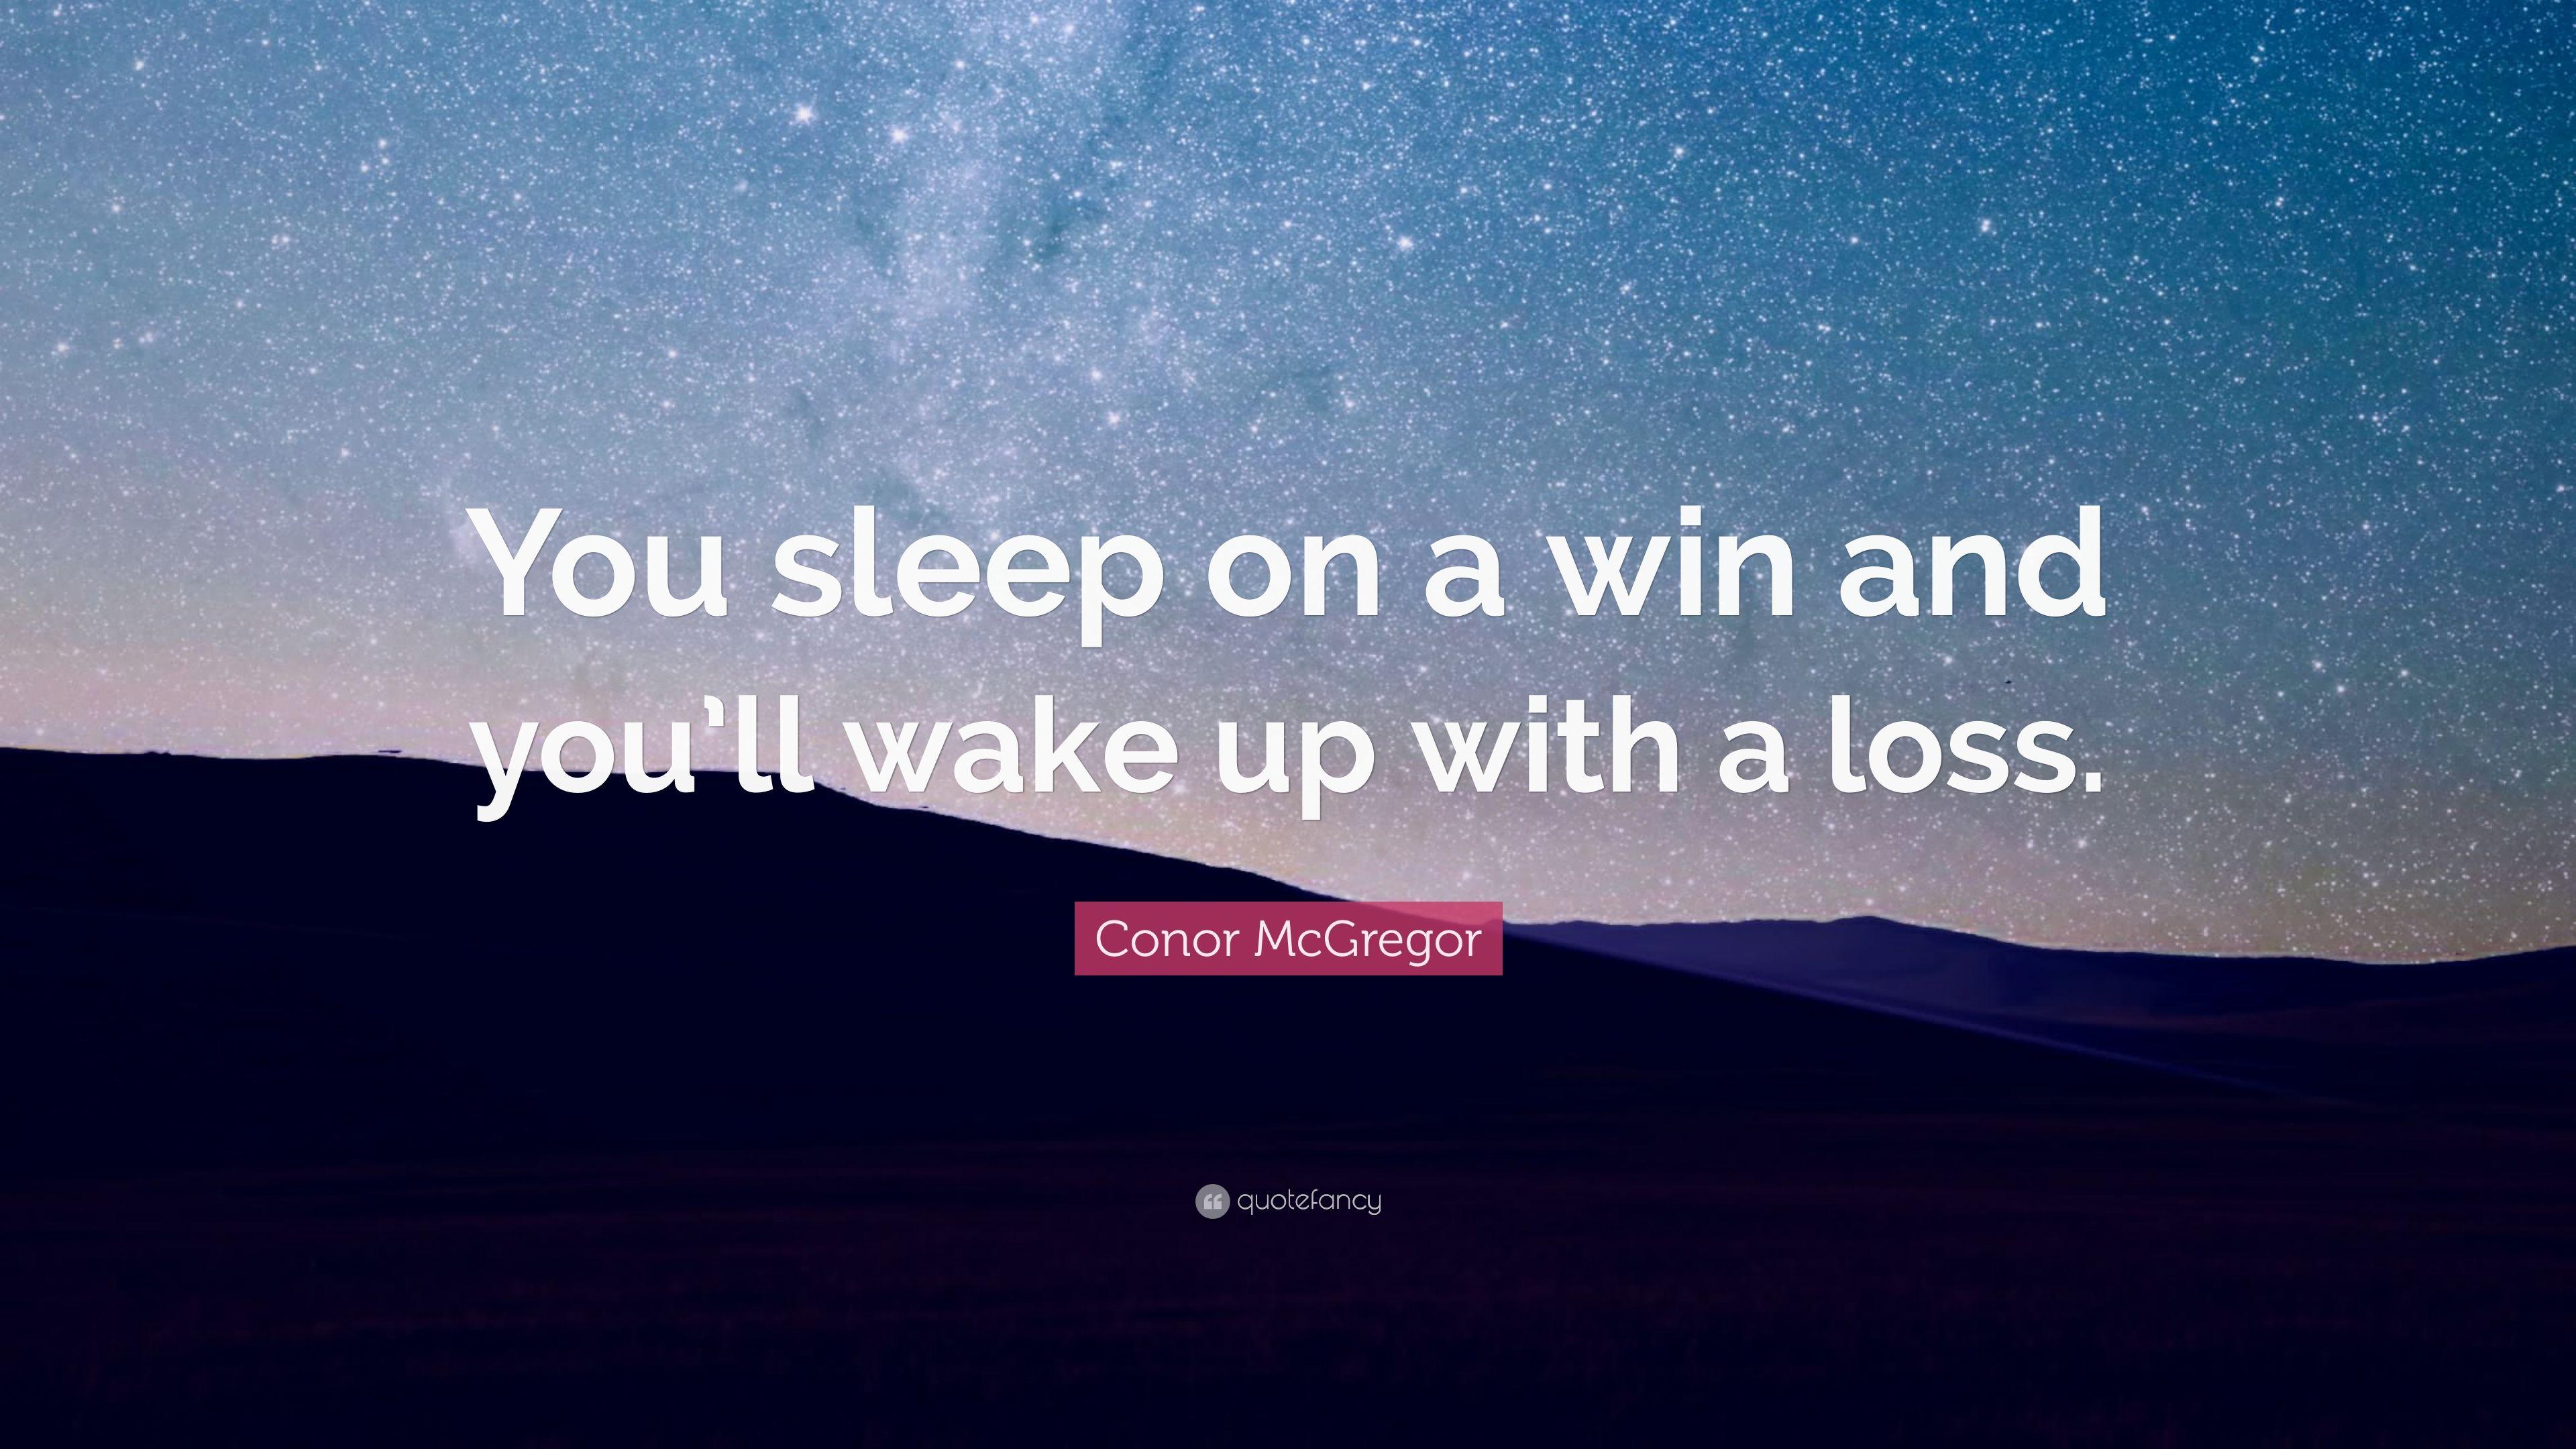 Conor McGregor Quote: “You sleep on a win and you'll wake up with a